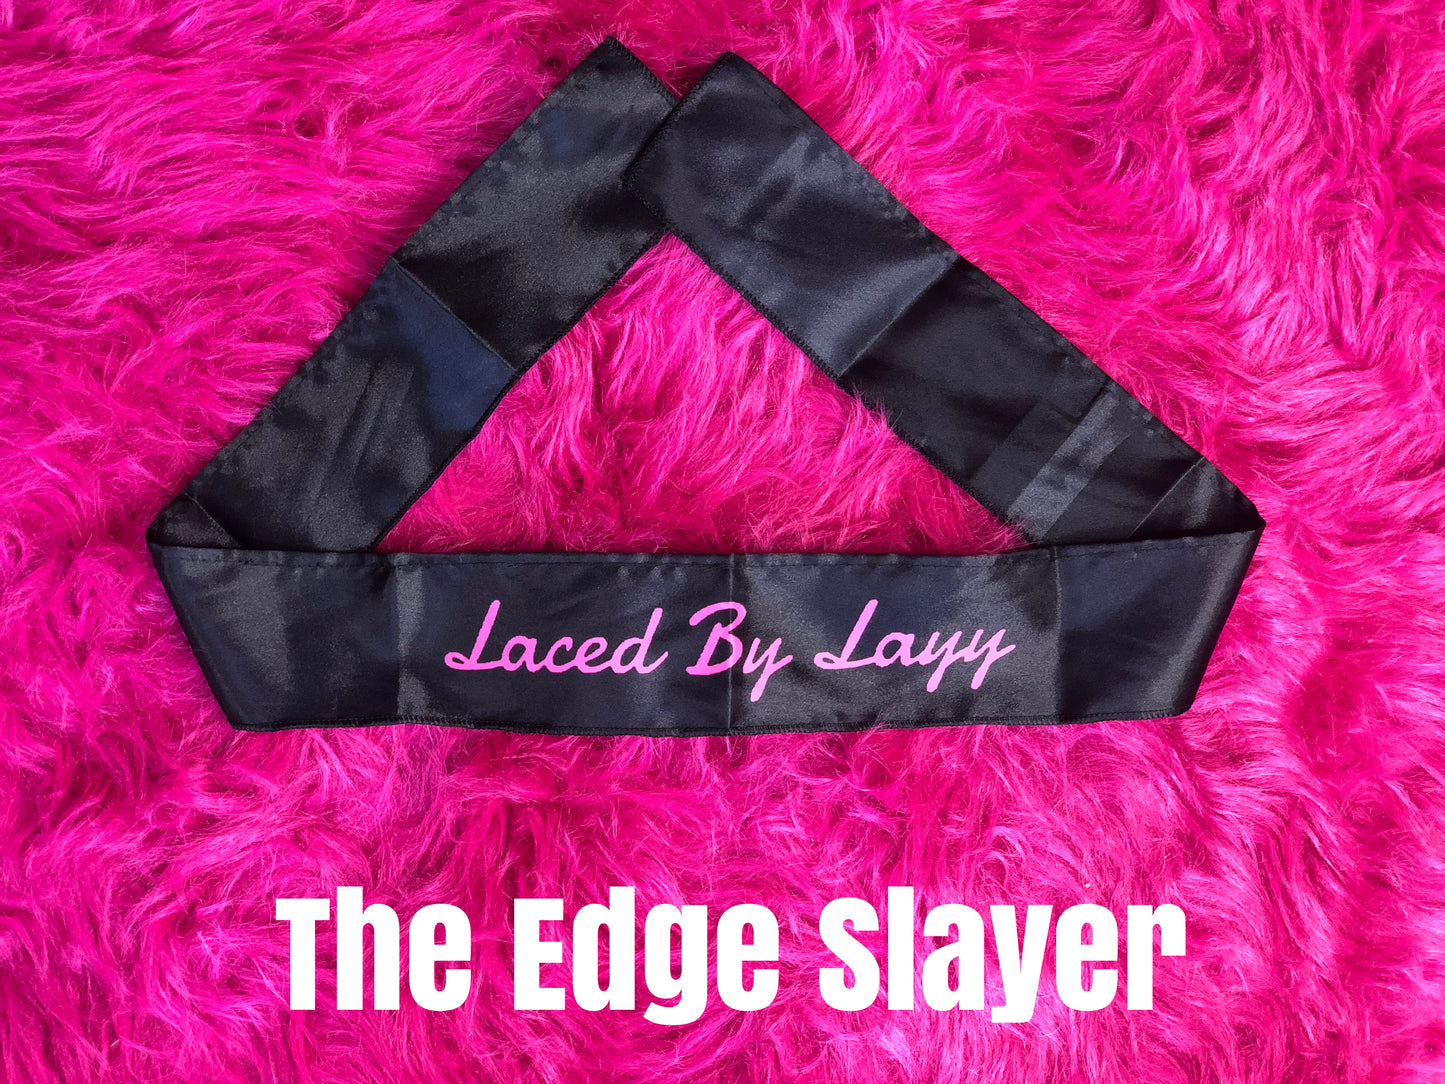 The Edge Slayer - Laced by Layy